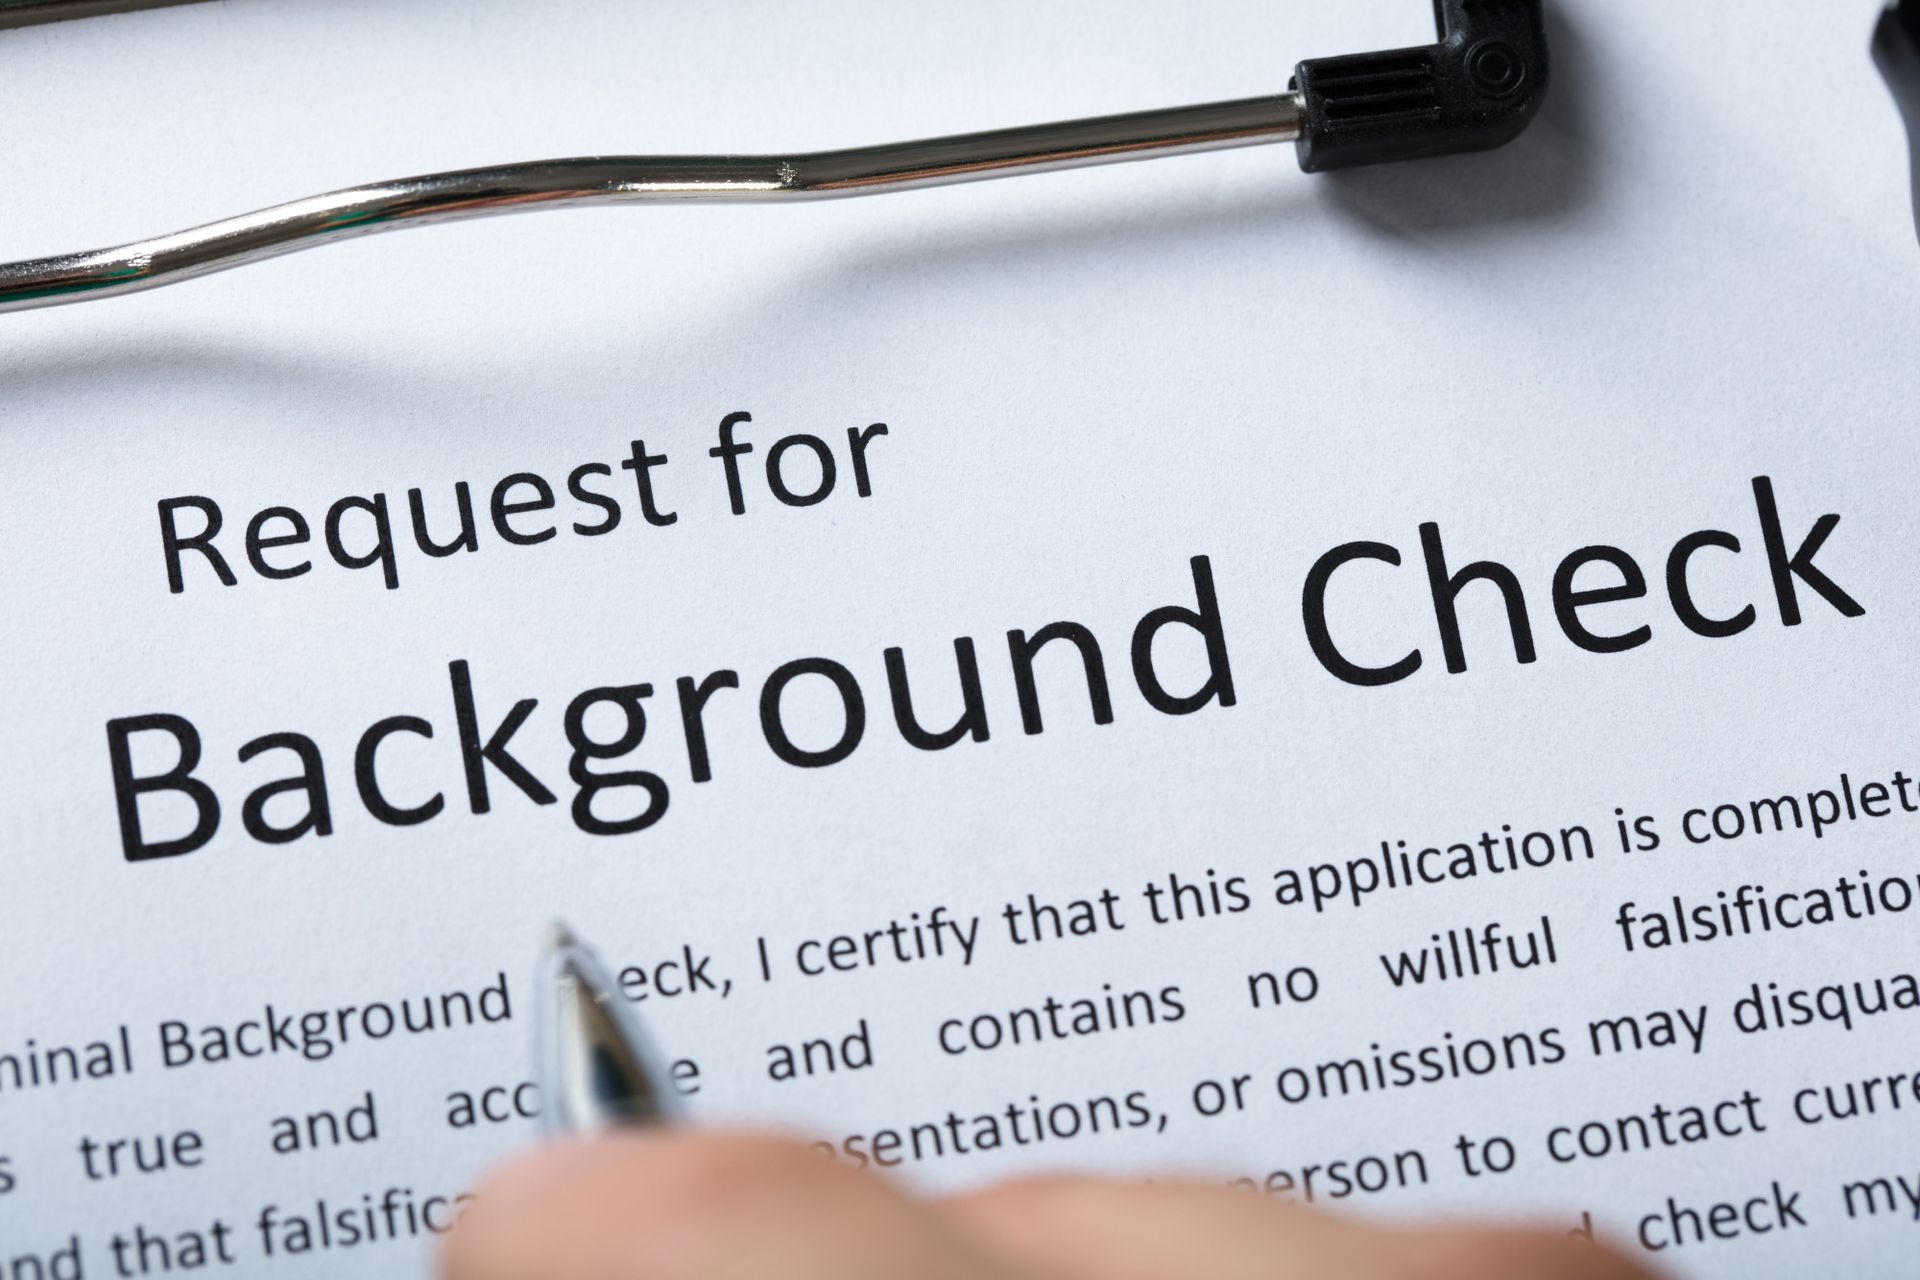 How to Run an Accurate Background Check